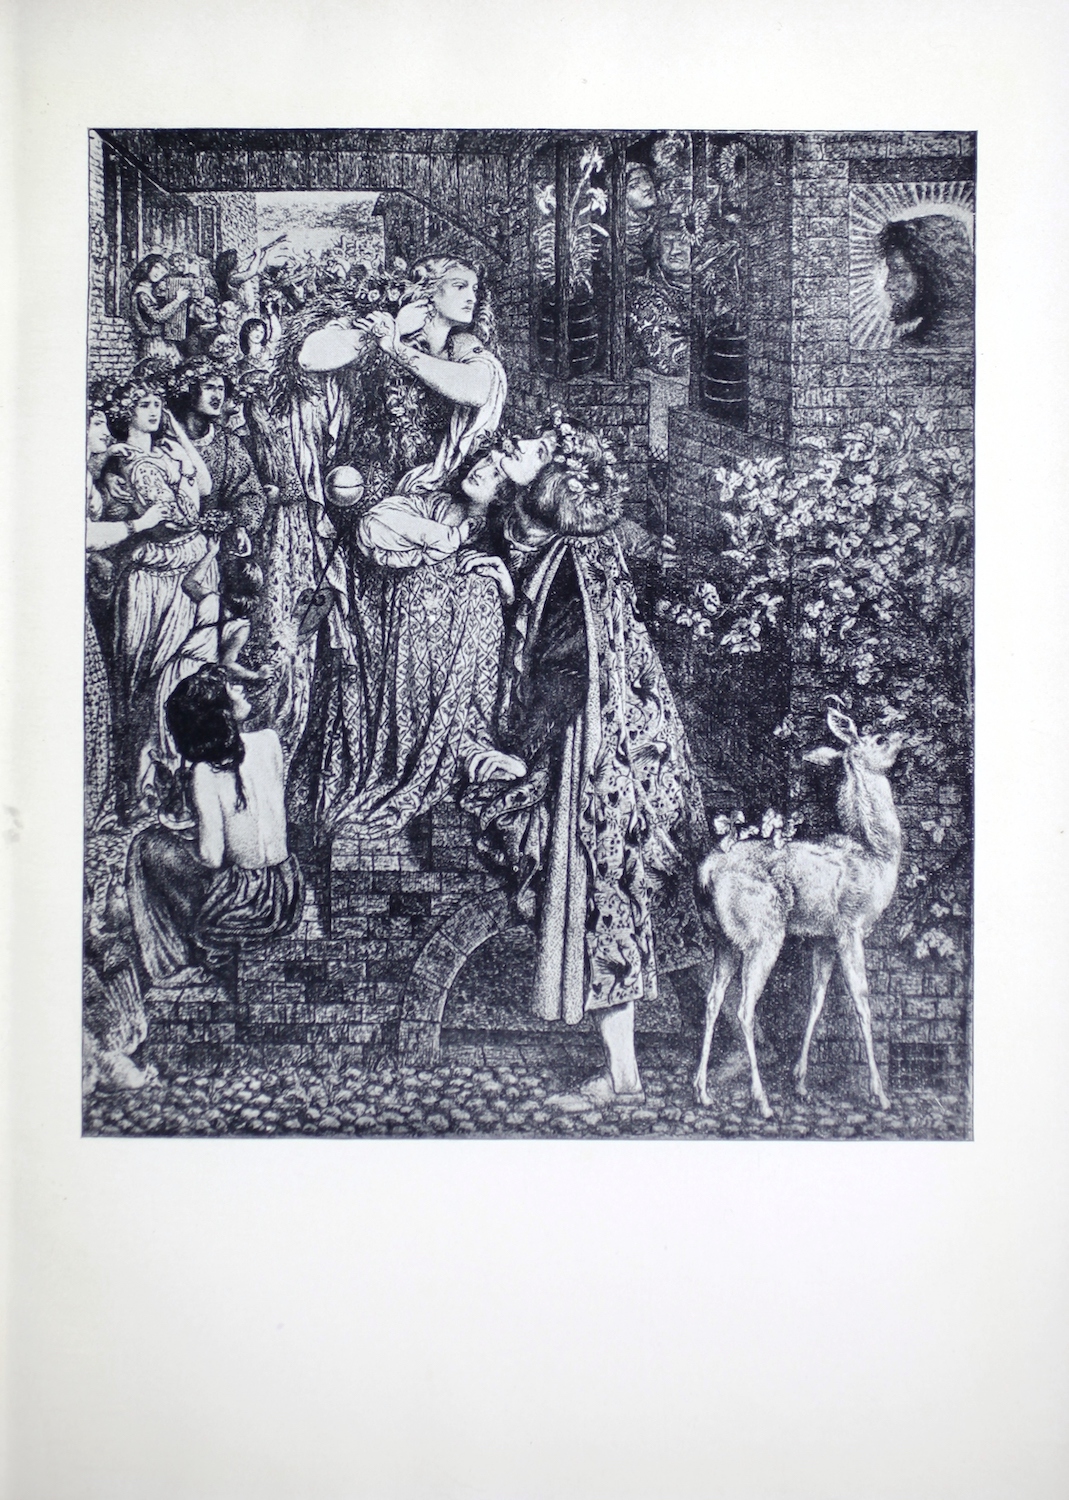 The black-and white image centres on a woman standing in a crowded street between two brick buildings. The woman, Mary Magdalene, faces the viewer in three-quarter profile. Mary’s hair is loose and hangs down her front. She appears to be removing flowers and greenery from her hair, over her right shoulder. A bottle of perfume hangs at her hip. Mary is climbing a set of stairs to the entrance of a brick building located on the right side of the image. Through an open window, the viewer can see the radiant head of Christ in profile, facing Mary as she approaches the front door of Simon’s home. The faces of a man, presumably Simon, and a woman, possibly Simon’s wife, appear inside the door, watching Mary enter. The door is framed by two pots of flowers: lilies to Mary’s left, sunflowers to her right. The street is filled with people who watch Mary as she enters Simon’s home; most are in the background, but three people and one animal are in the foreground. The animal in the foreground at the bottom right corner is a fawn that appears to be eating the vines along the brick wall of the building. The ground is cobblestone. By the fawn’s feet is a grate in the wall that resembles a storm drain for water. Immediately in front of Mary, a couple hold each other. The female figure is in a long dress and sits on the stairs, learning her head on the male figure’s shoulder. He stands with his back to the deer and wears an elaborately decorated hat and cape. They both gaze up at Mary as she climbs the stairs behind them. The final figure in the foreground is a topless child sitting at the foot of the staircase to the left of the couple. Another small child stands behind the Magdalene holding up a bouquet of flowers to onlookers. Behind Mary, to the viewer’s left, there are three figures, two women and one man, all wearing garlands in their hair. Among the crowd, to the right of the image’s frame but in the far distance, leaning against the building on the other side of the street, two figures play instruments – one a wind instrument, possibly a flute, the other a string instrument, possibly a lute. Further figures in the far background are unclear but one appears to be labouring with a large sack.